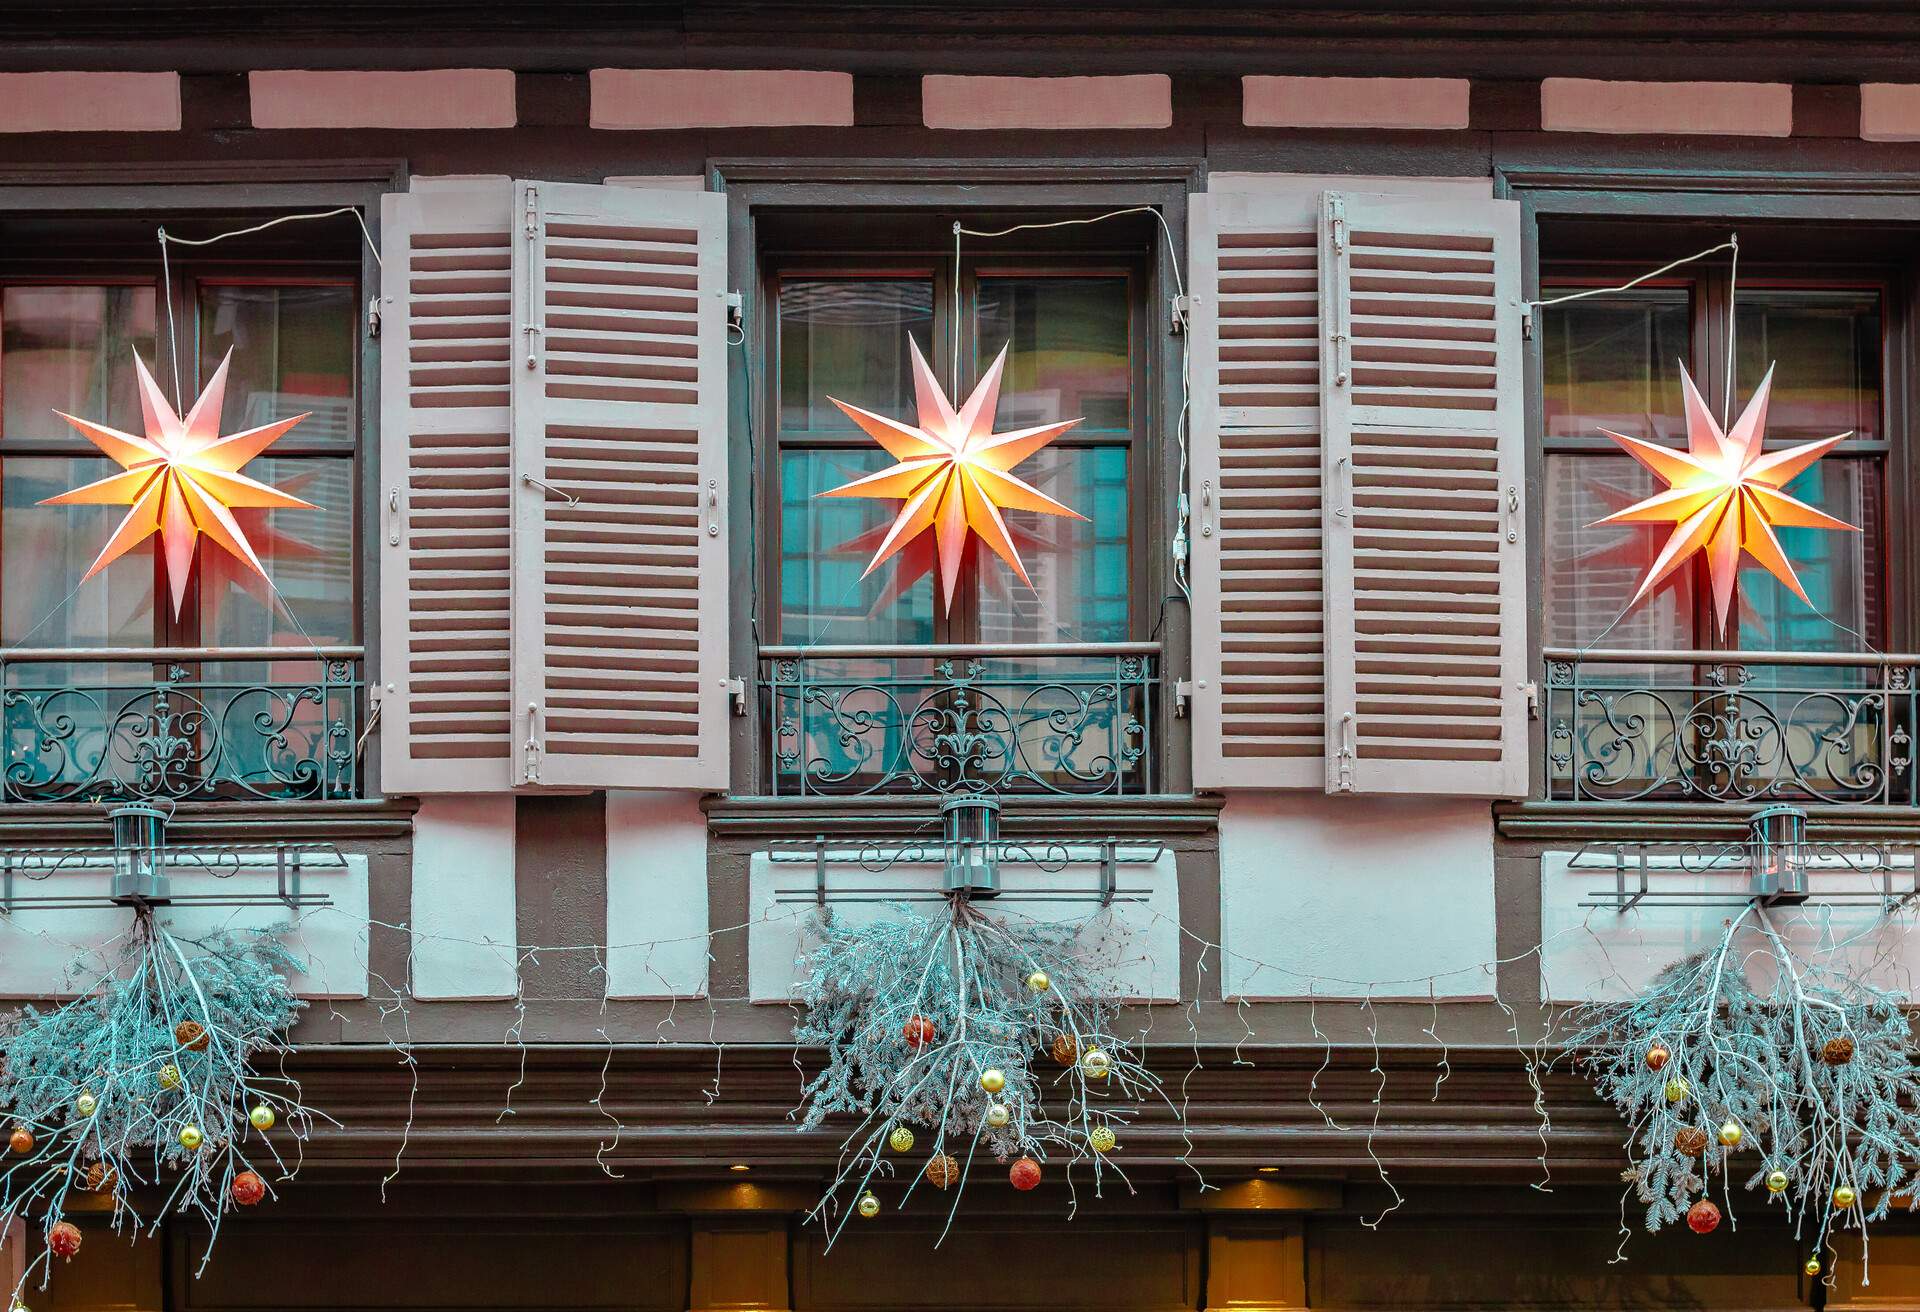 Christmas decorated half-timbered house with wooden shutters and railings in Ribeauville, Alsace, Eastern France.